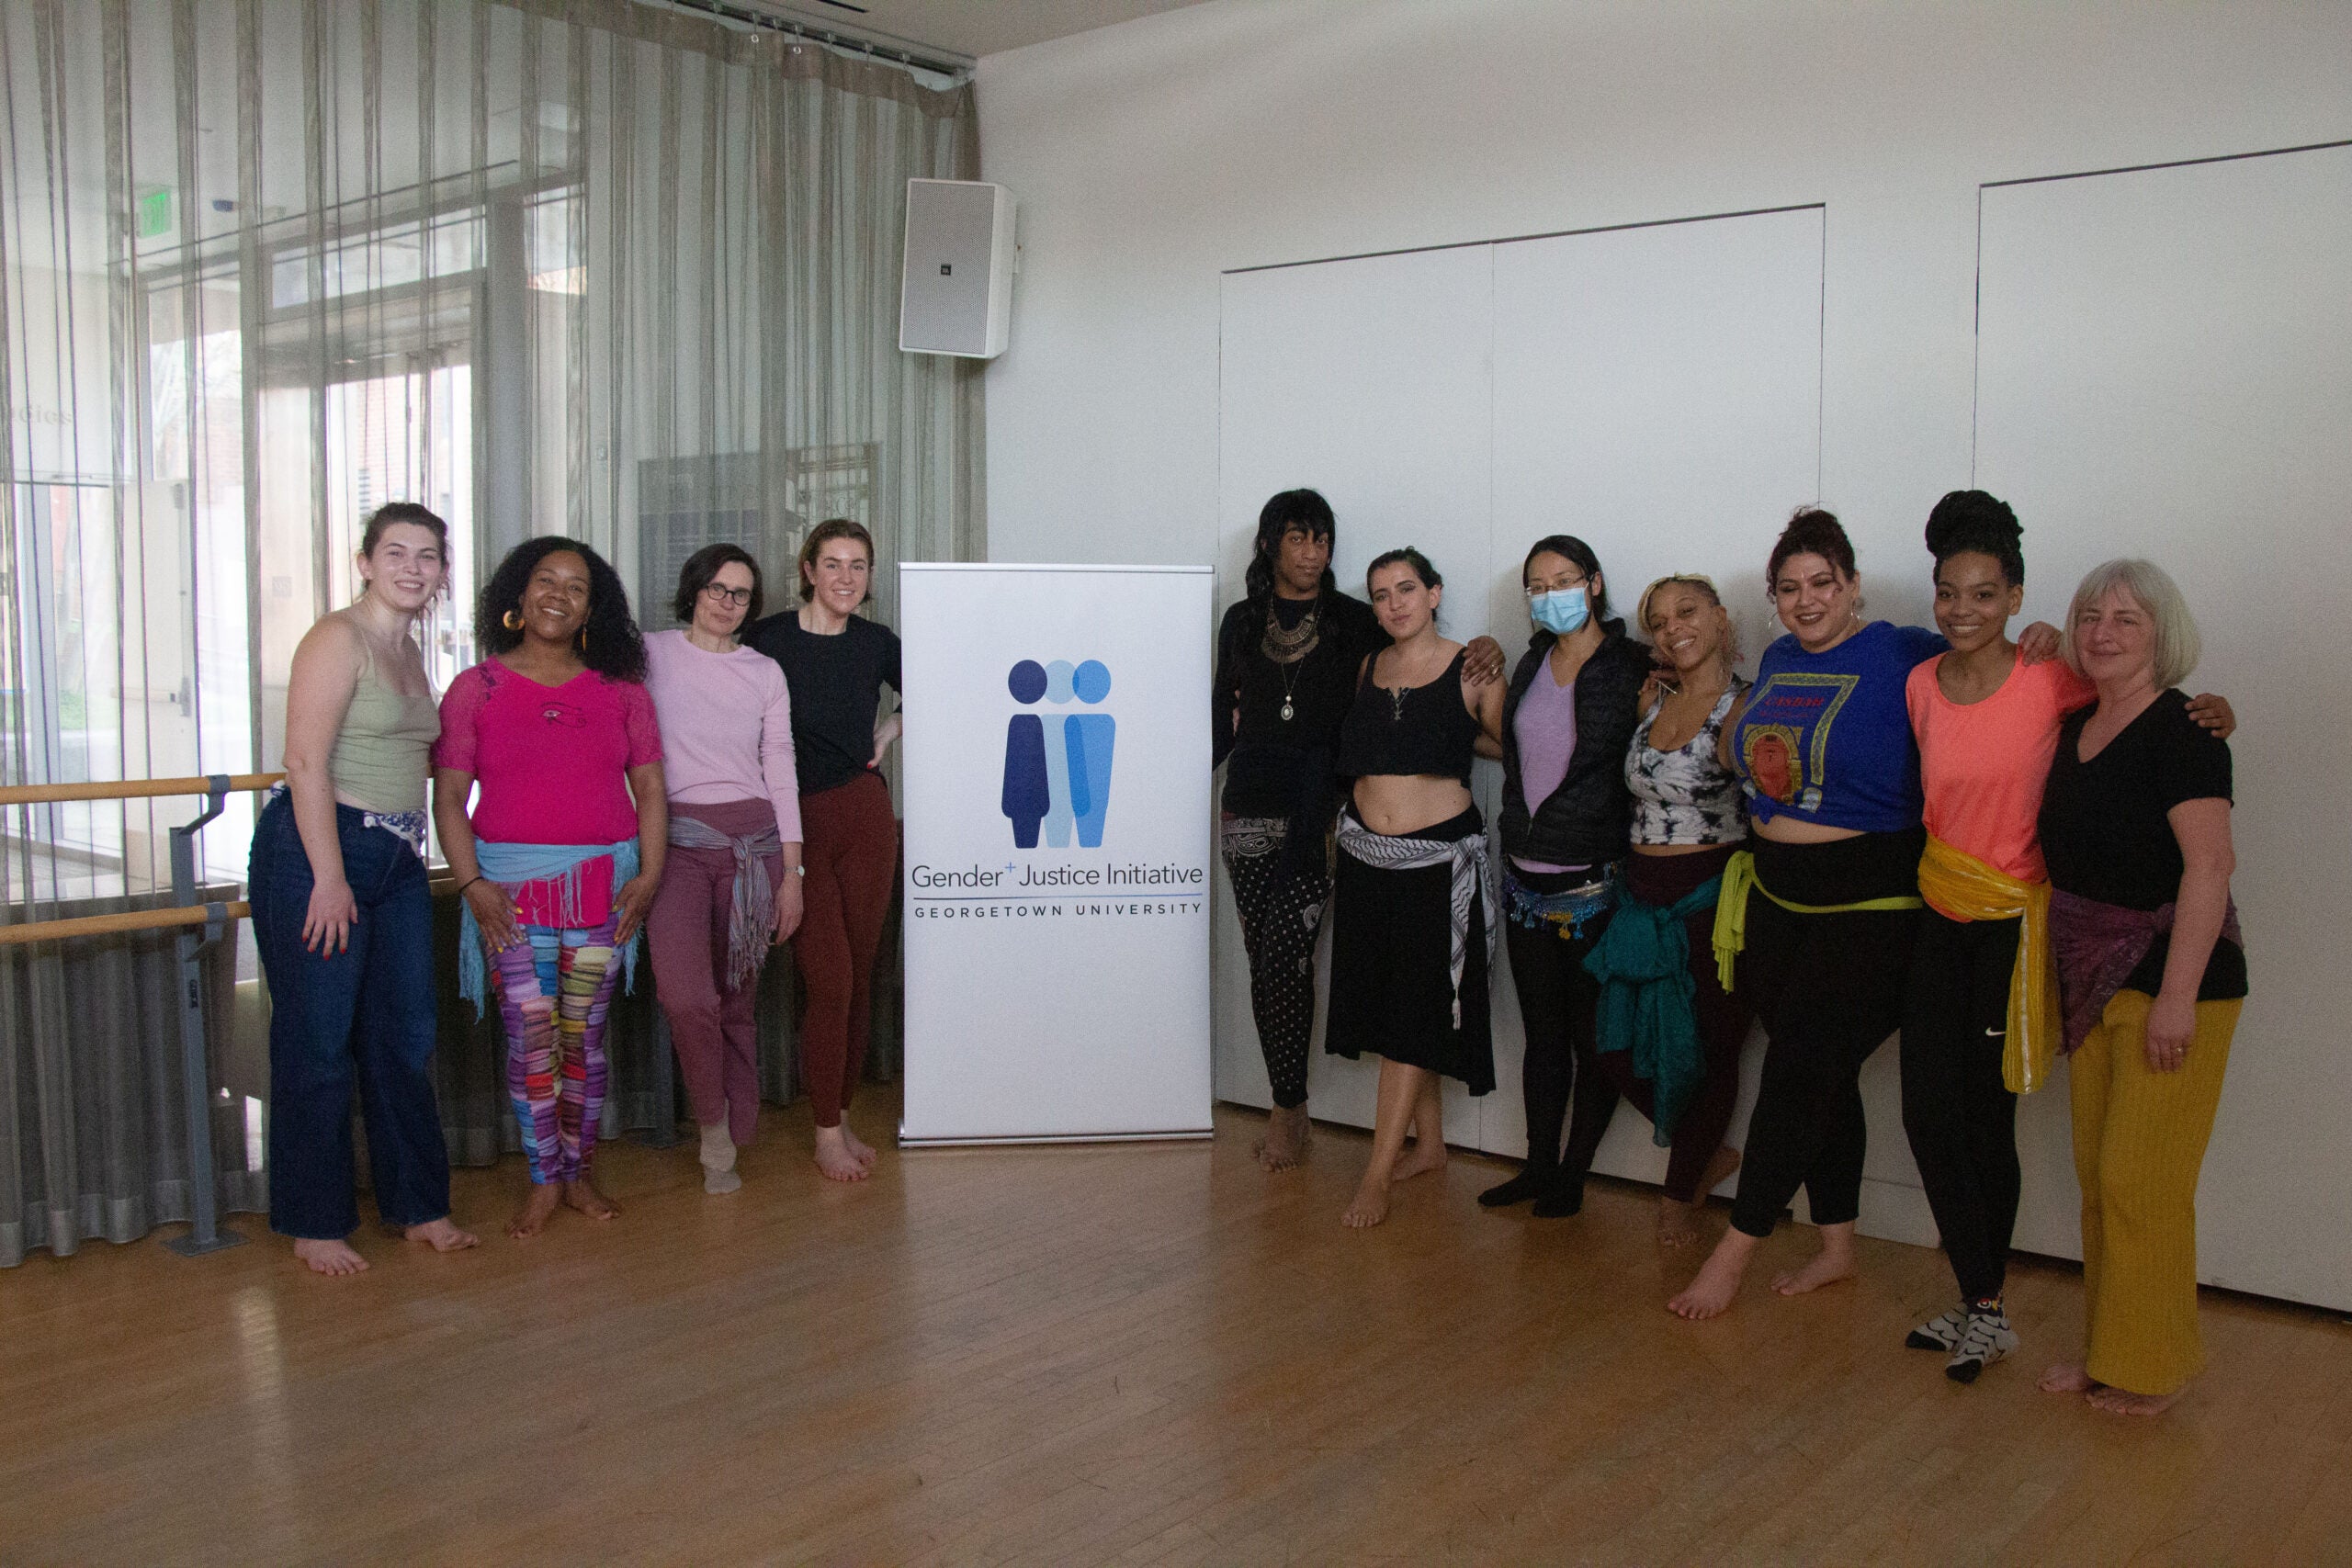 Eleven dancers pose for a photo in a dance studio. A roll up banner stands between the dancers. Four to the left of the banner and seven to the right. The dancers are of different races, ethnicities, and genders. Warda is the third one on the right.